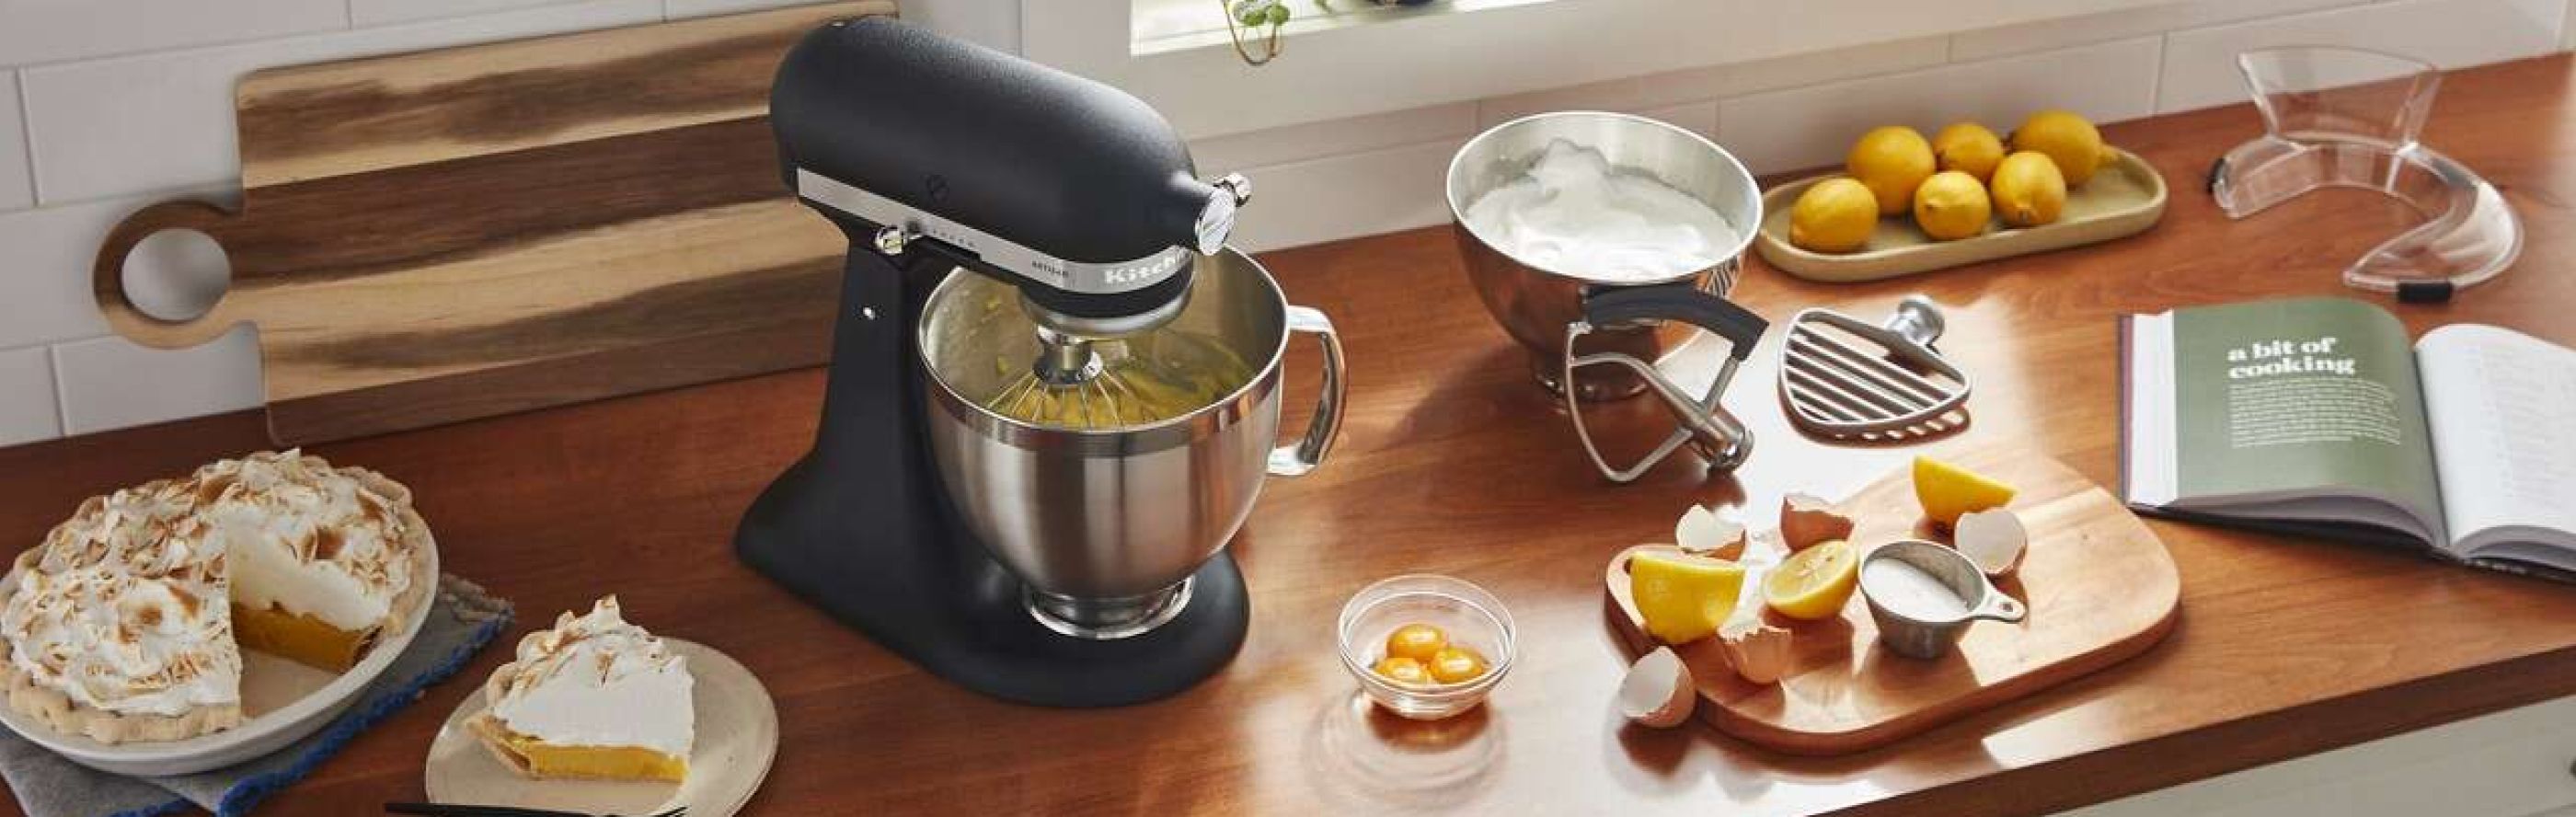 Black KitchenAid® stand mixer on countertop with various ingredients and slice of pie